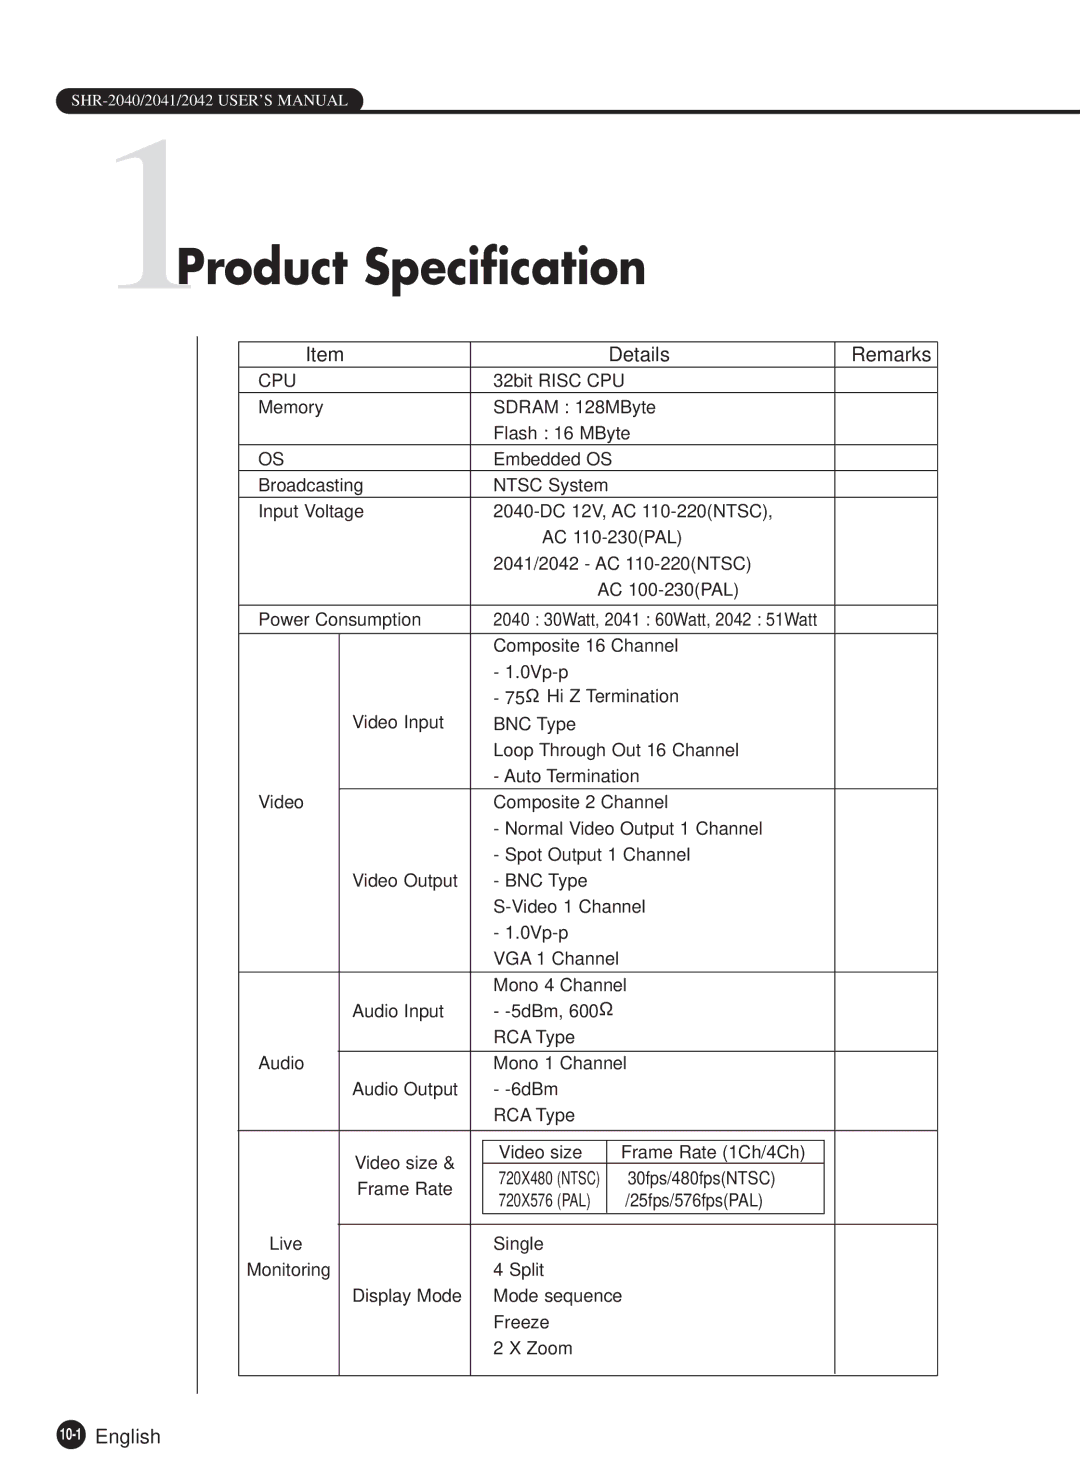 Samsung SHR-2040N, SHR-2040P manual 1Product Specification, Details Remarks, 10-1English 